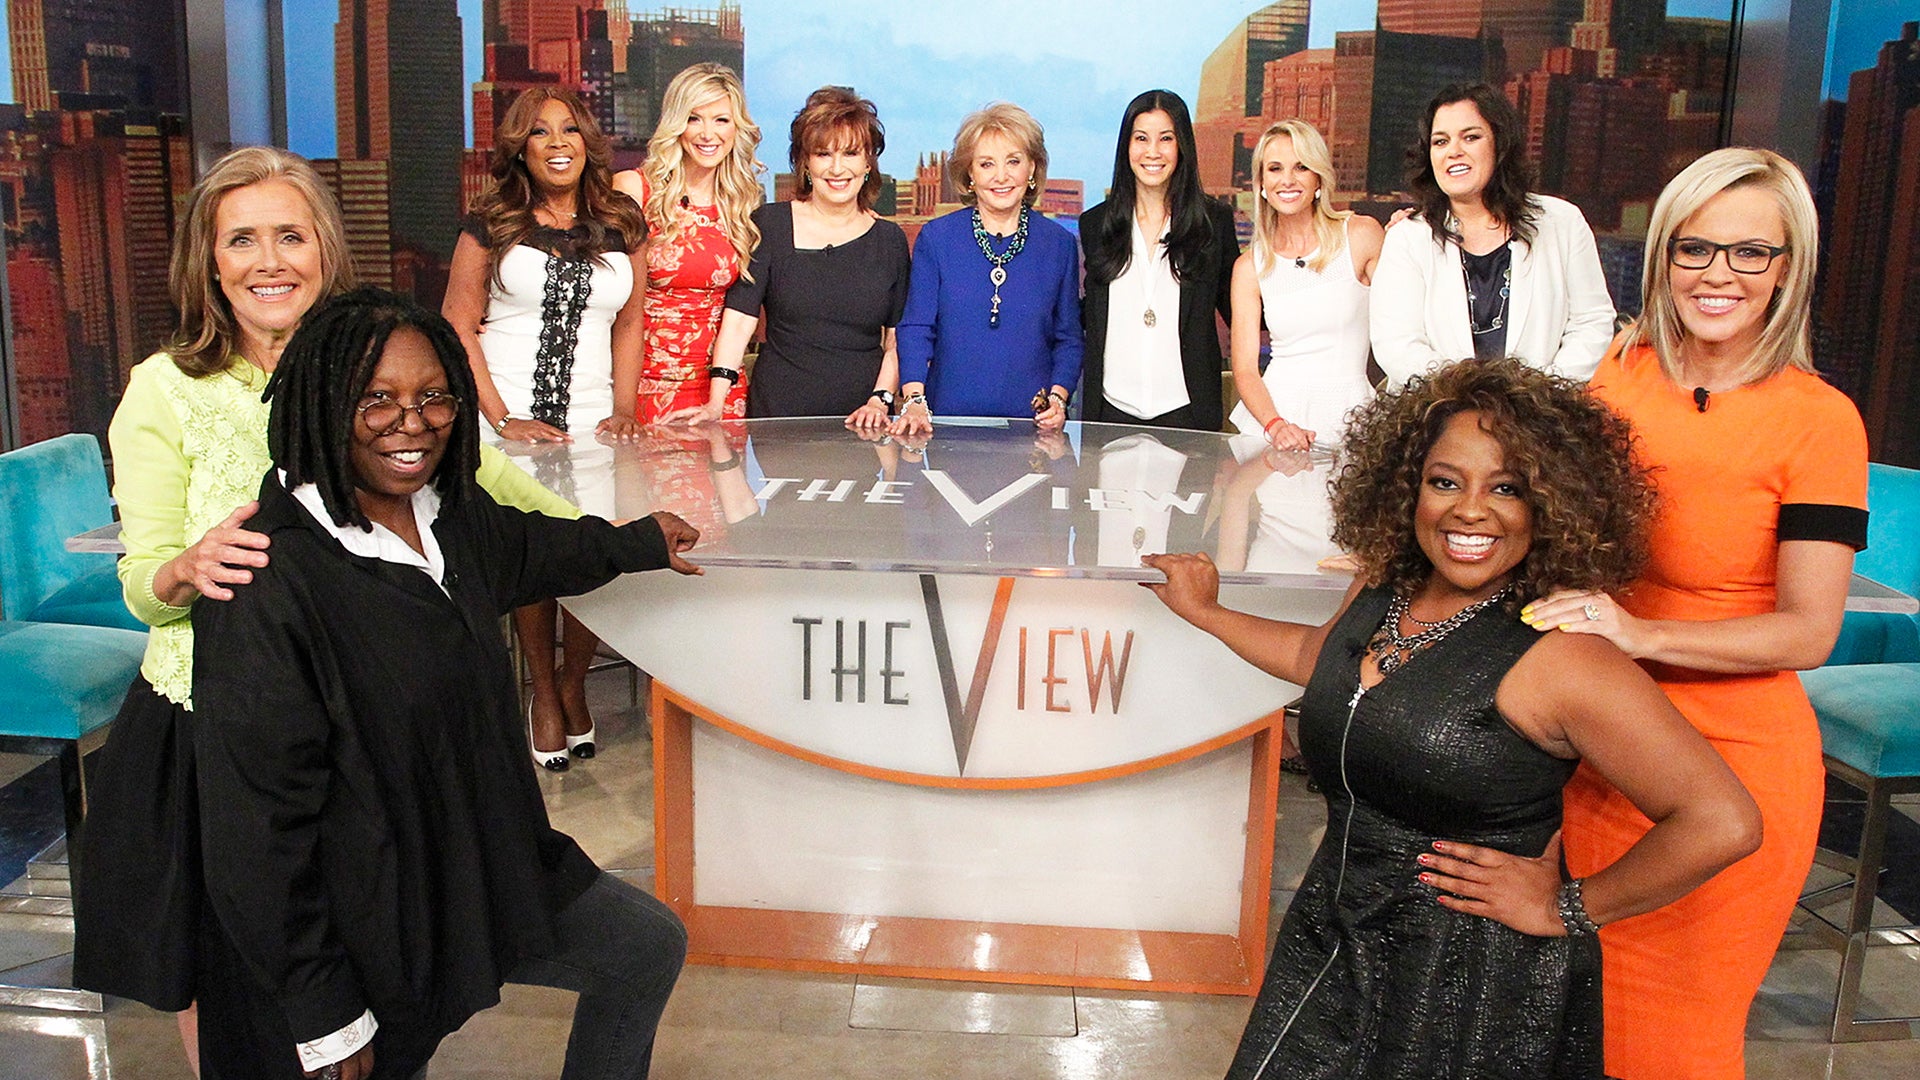 'The View' Hosts Then and Now Entertainment Tonight